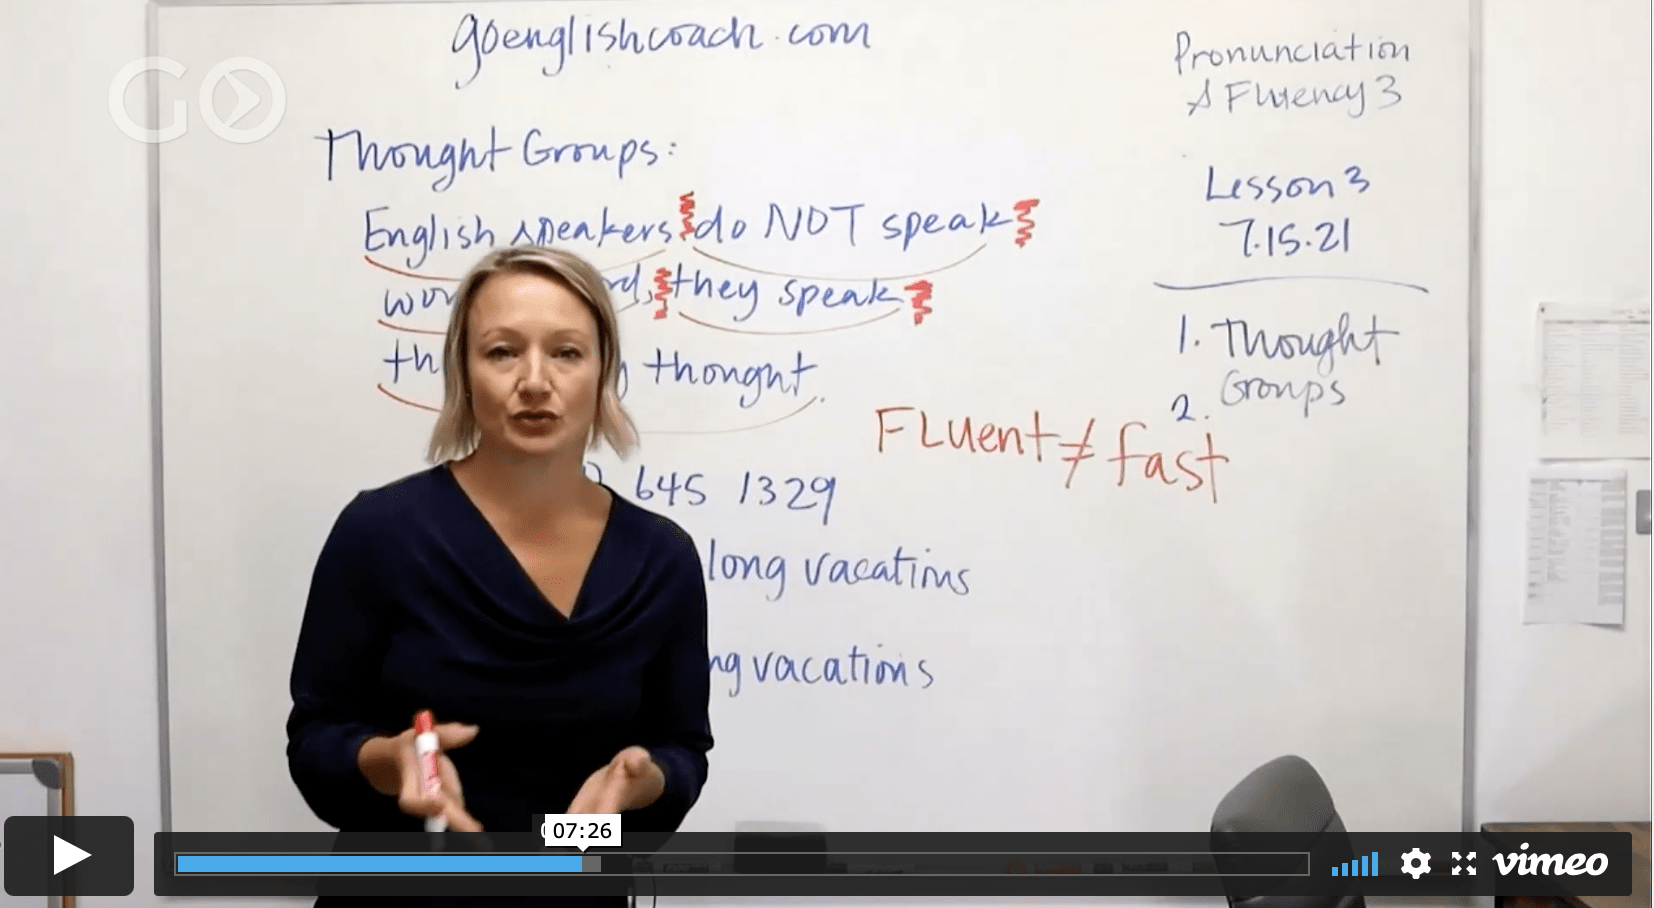 Pronunciation and Fluency 3: Thought Groups 7.15.21